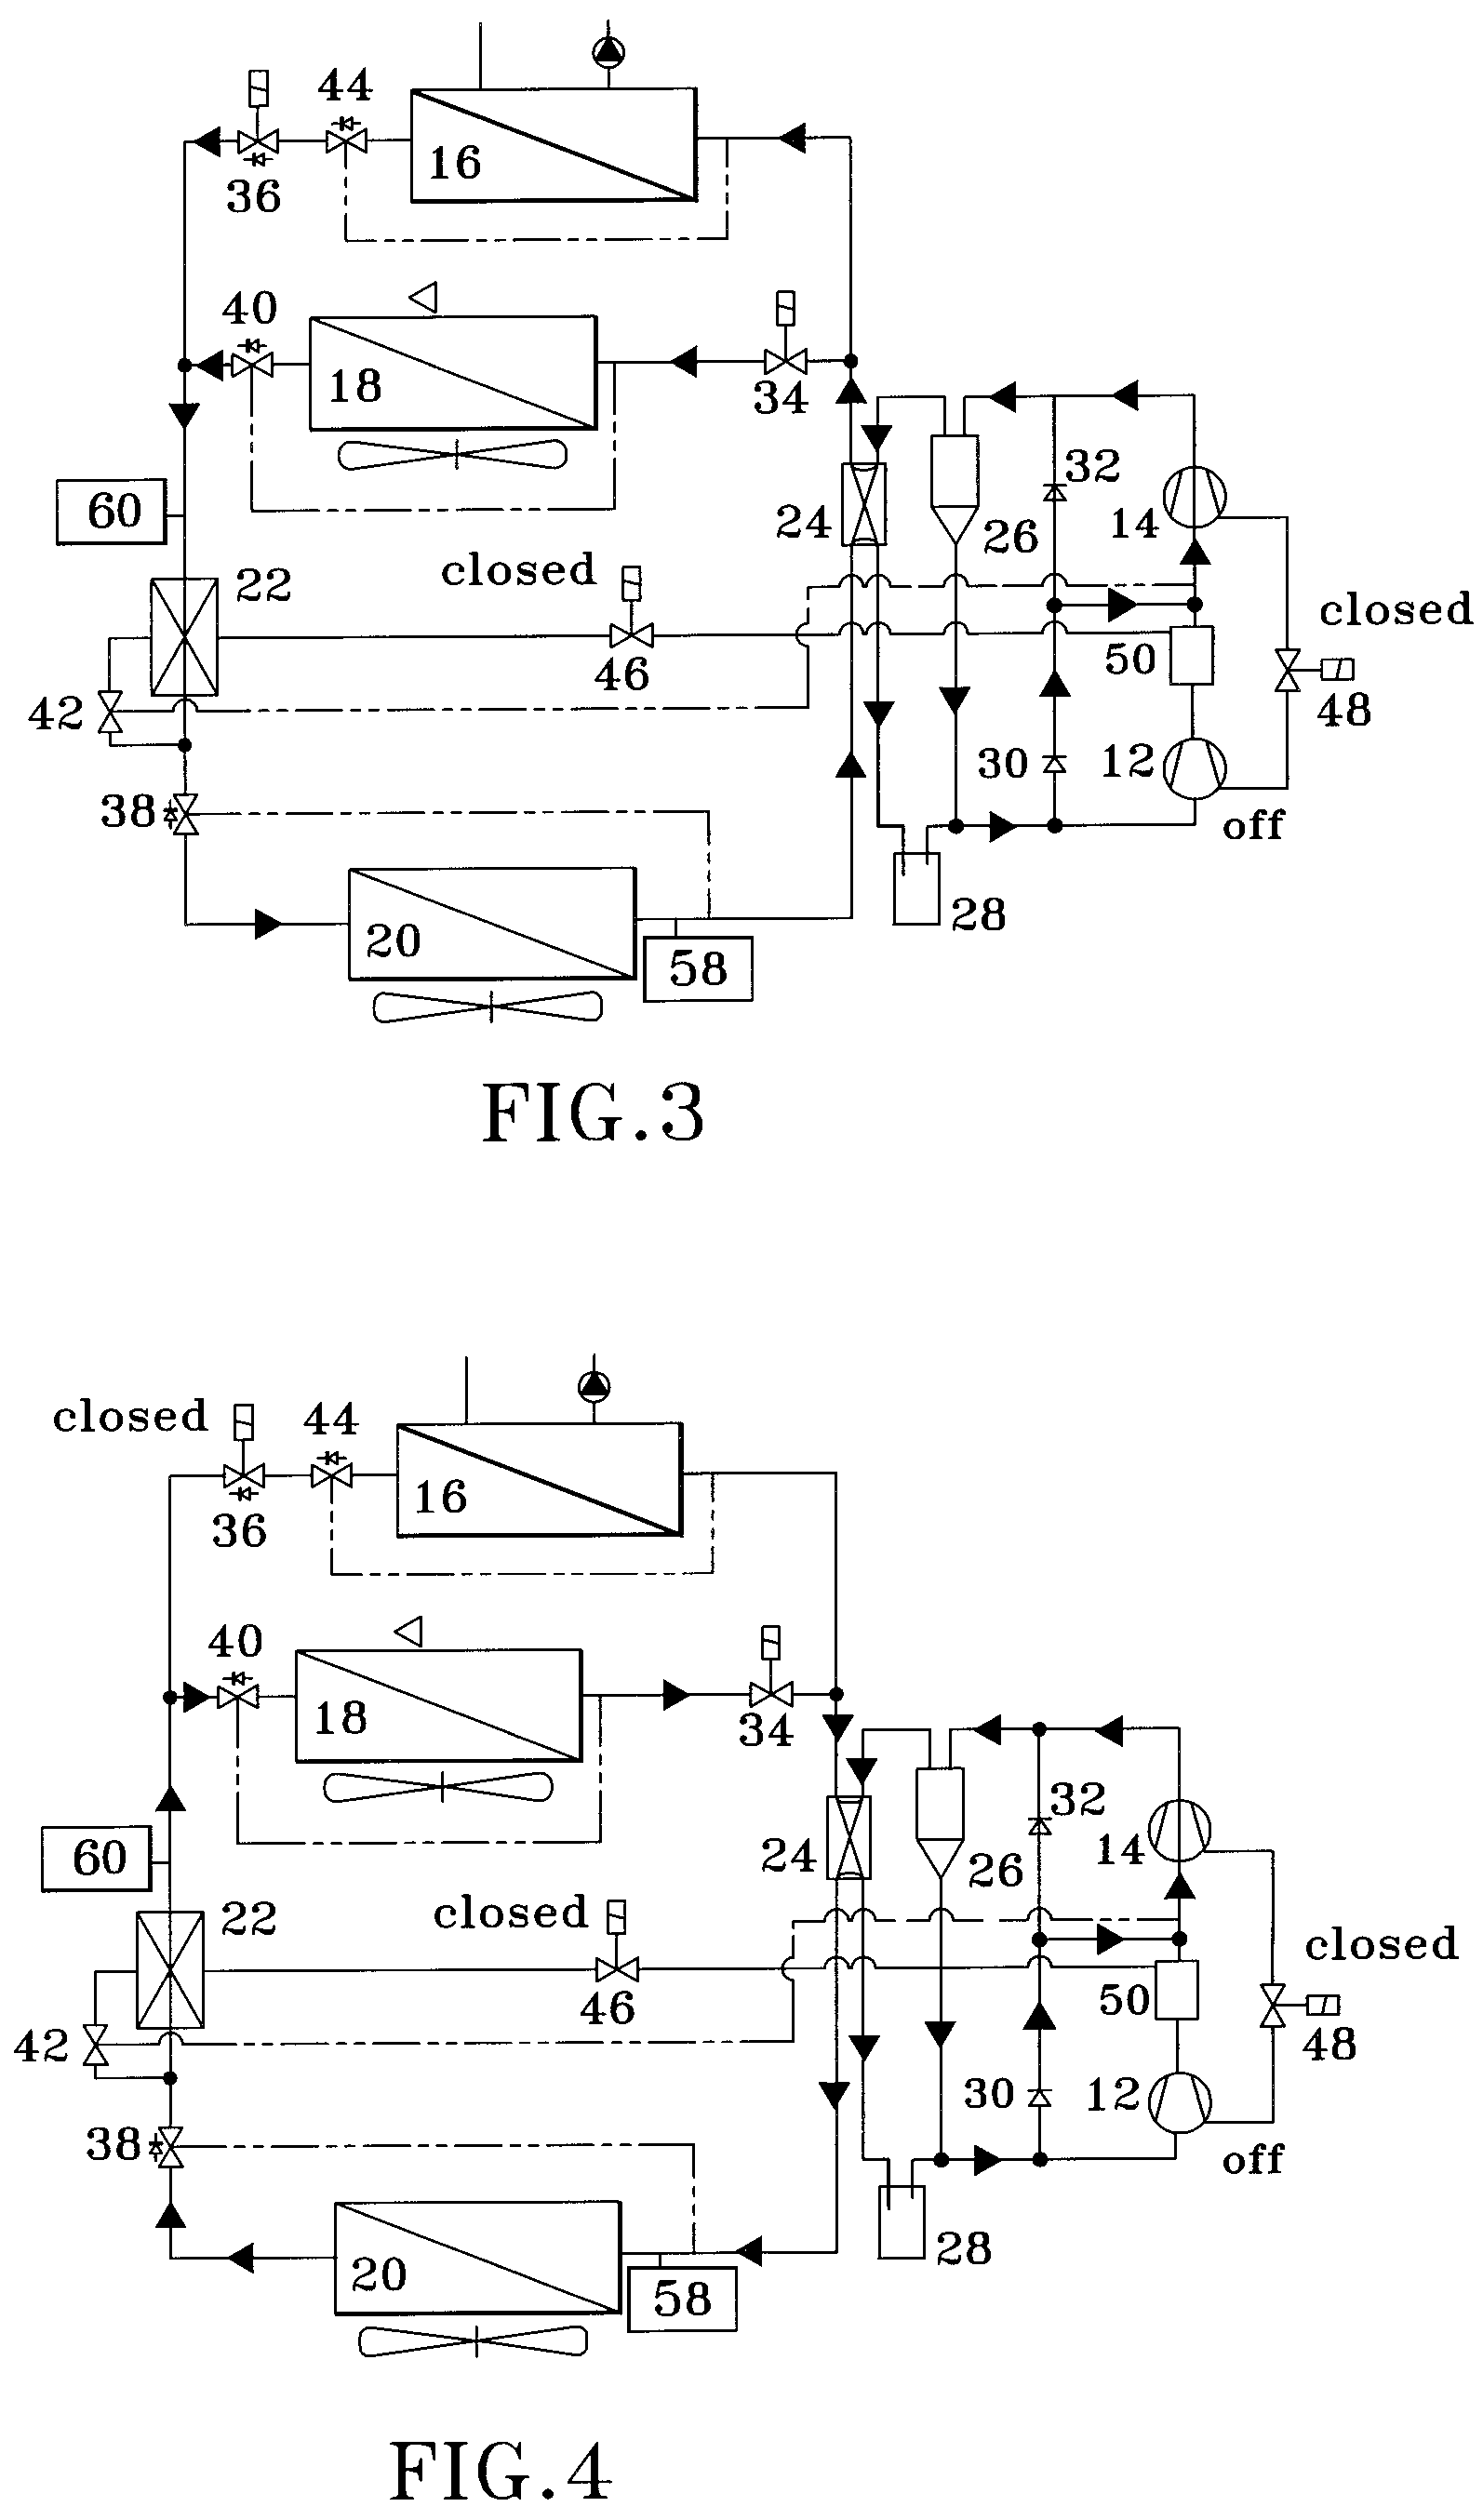 Heat pump system with multi-stage compression